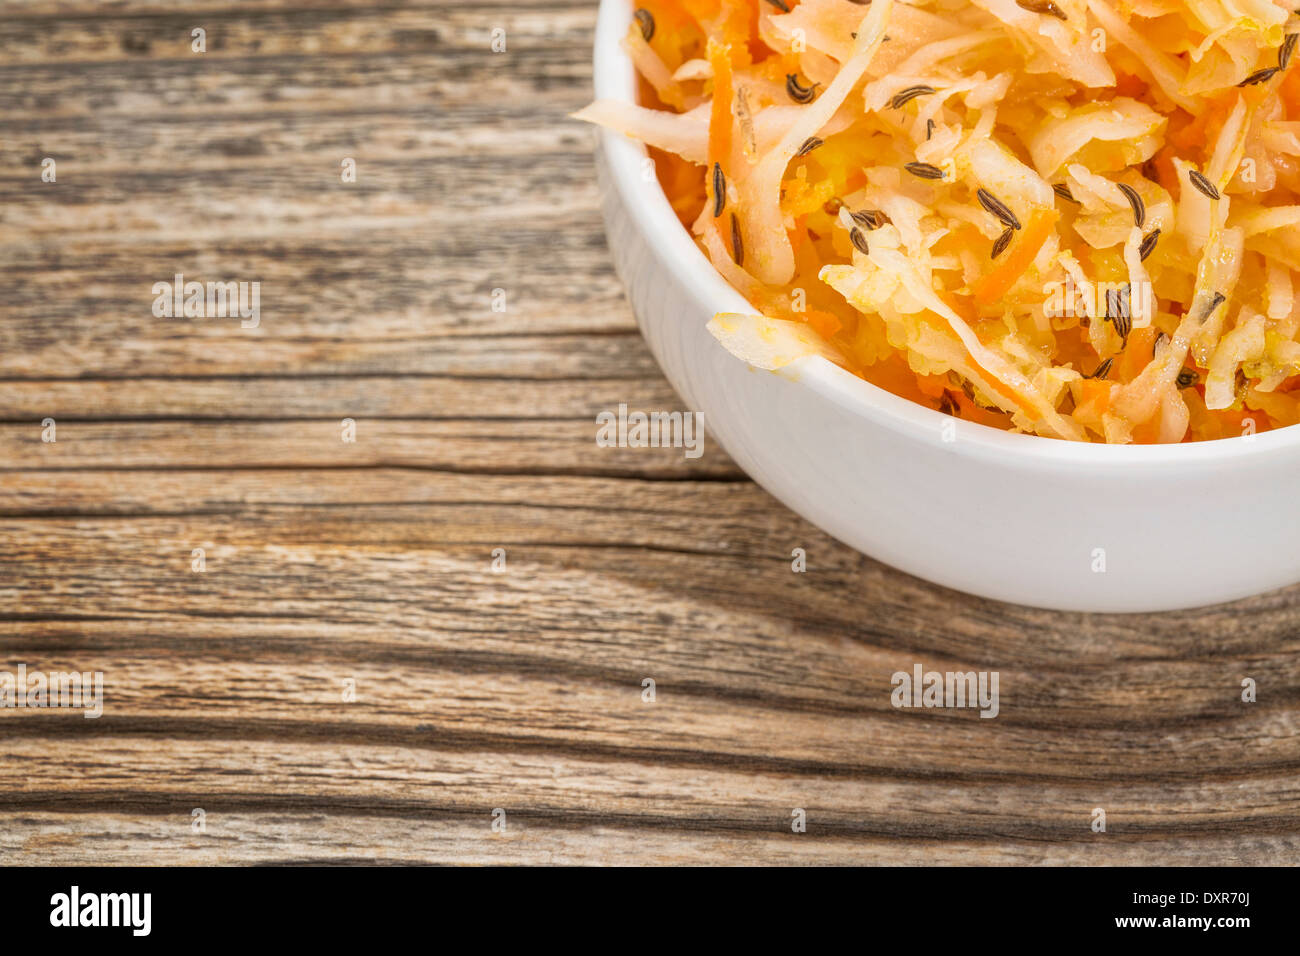 sauerkraut salad with carrot, caraway seeds and olive oil - a small bowl against grained wood Stock Photo